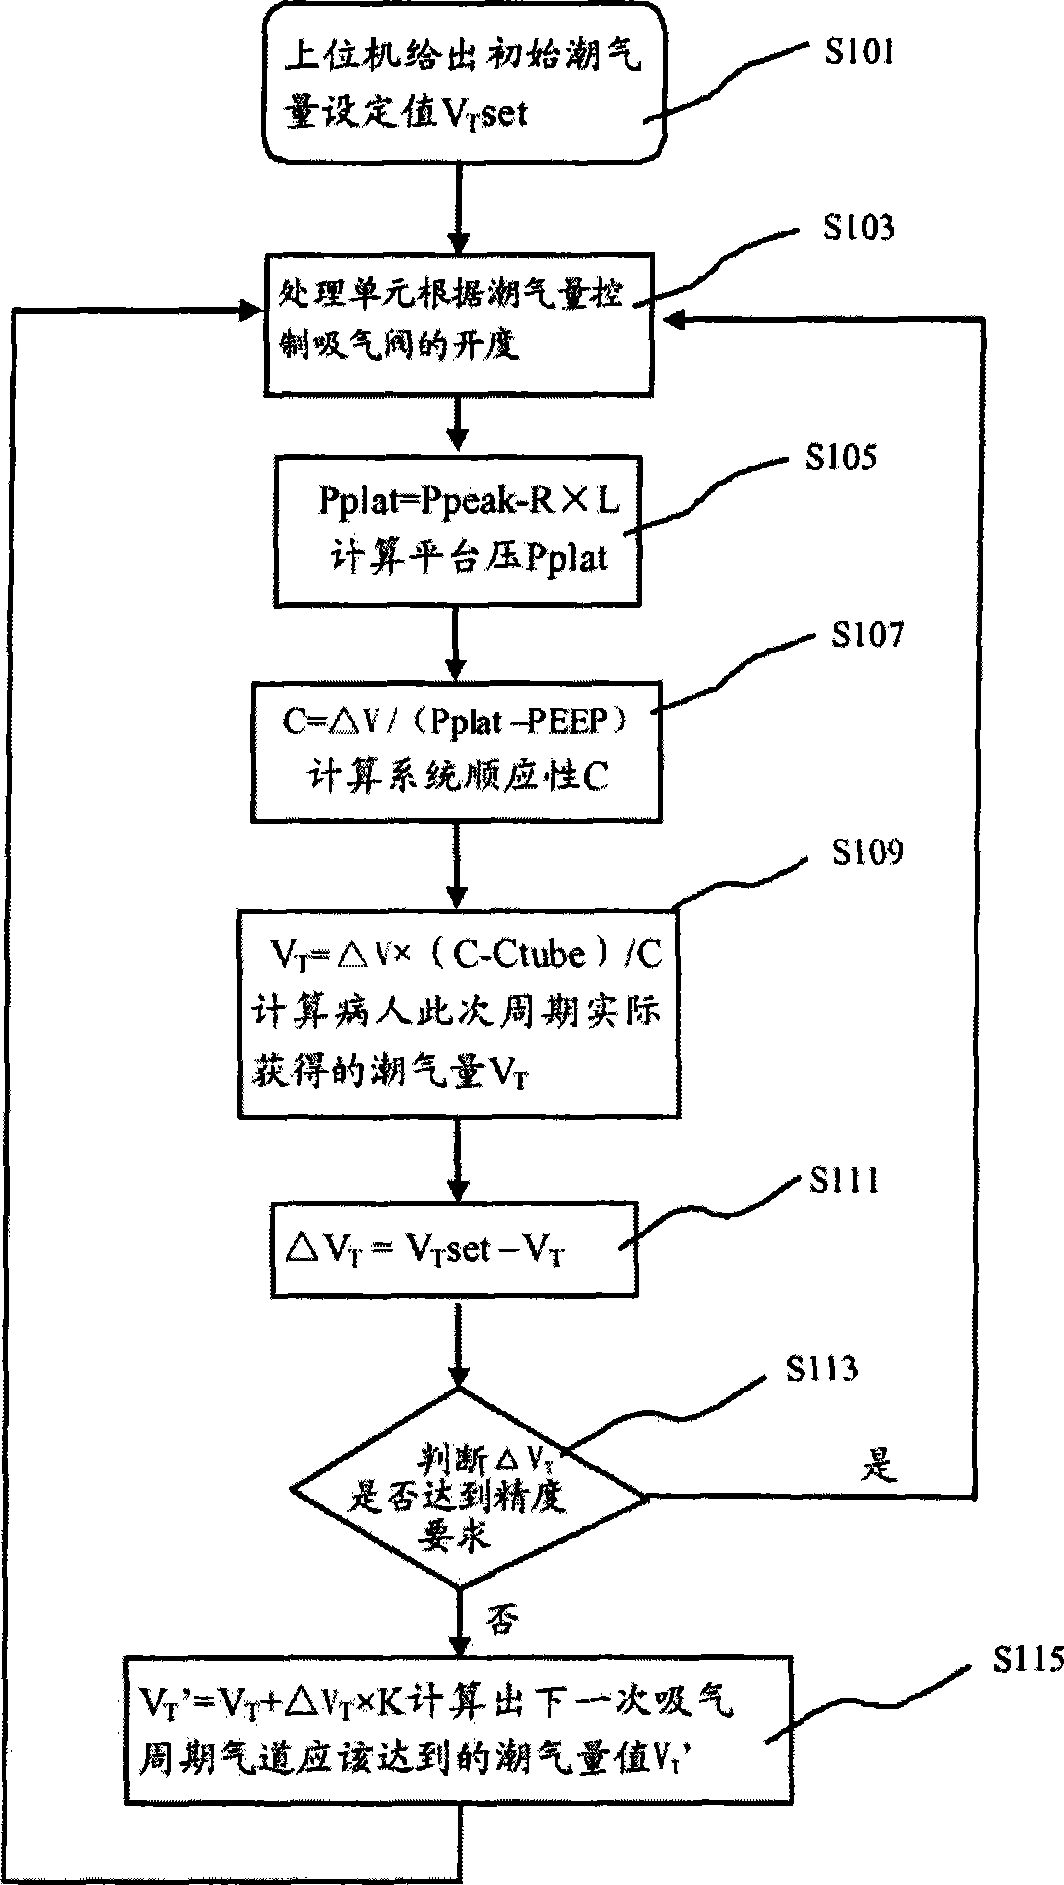 Method for improving tidal volume control and detection accuracy by introducing R value for calculation